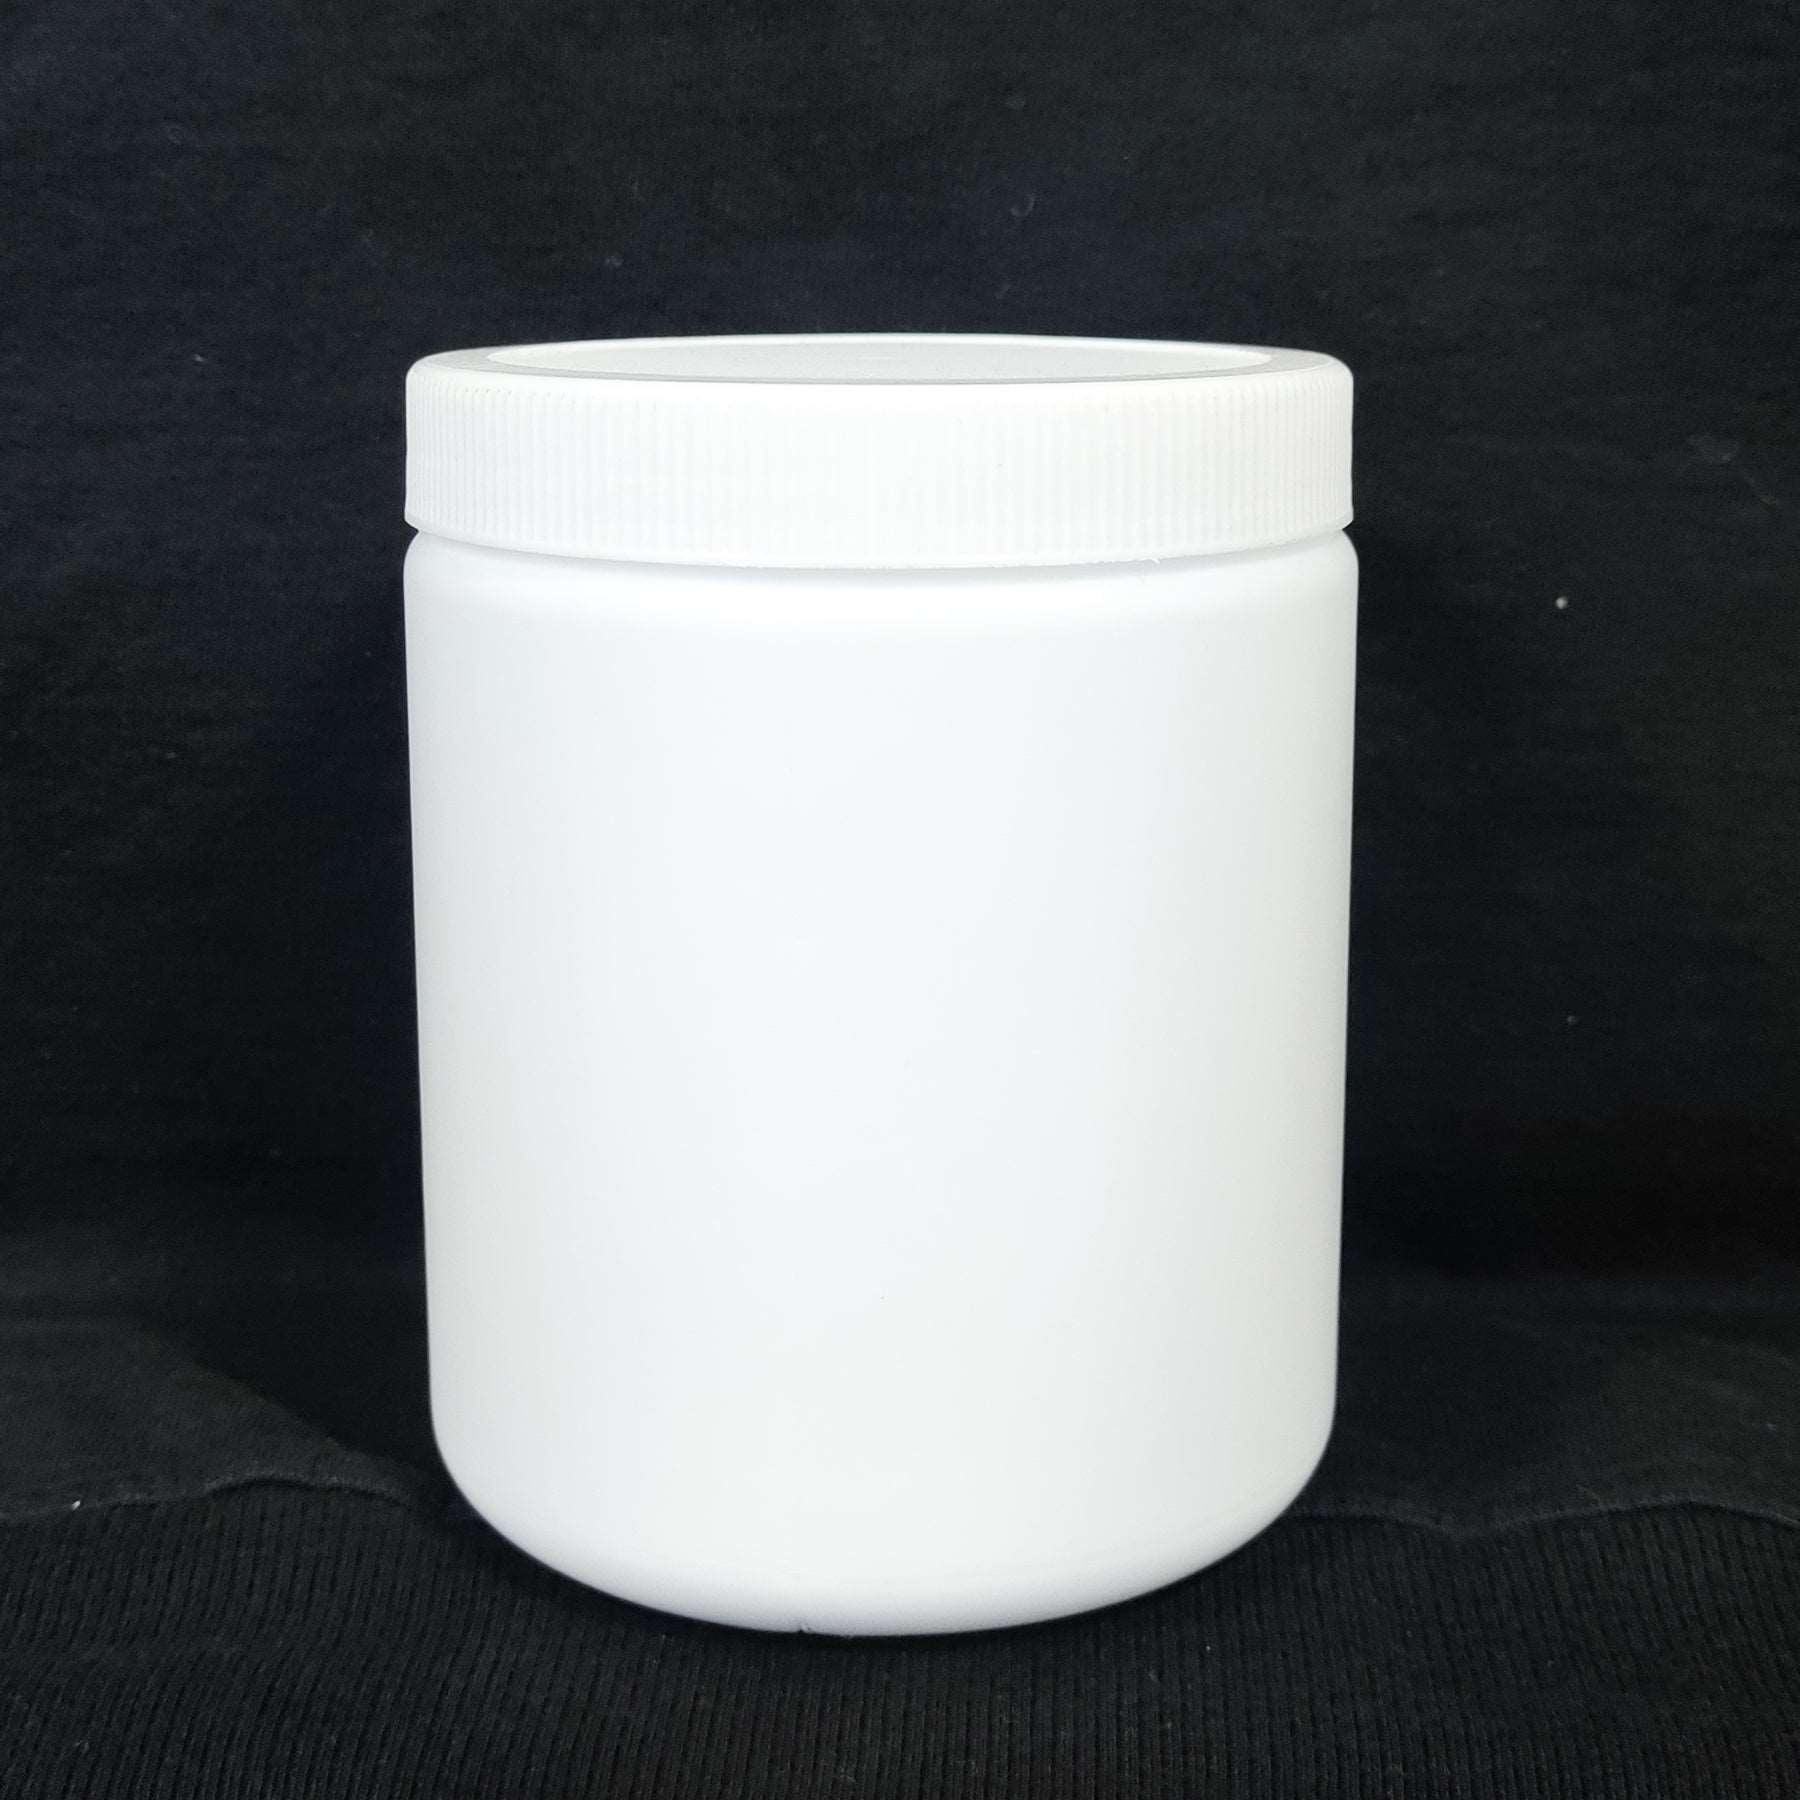 650ml White HDPE Empty Jar for Secure Storage., Patco Pharma, Plastic Containers, 650ml-white-hdpe-empty-container-for-ayurvedic-powder-storage-container-air-tight, Ayurvedic Powders, Freshness Guarantee, HDPE Jar, Hygiene Assurance, Medicine Storage, Moisture Protection, Pharmaceutical Packaging, Travel-friendly, Patco Pharma